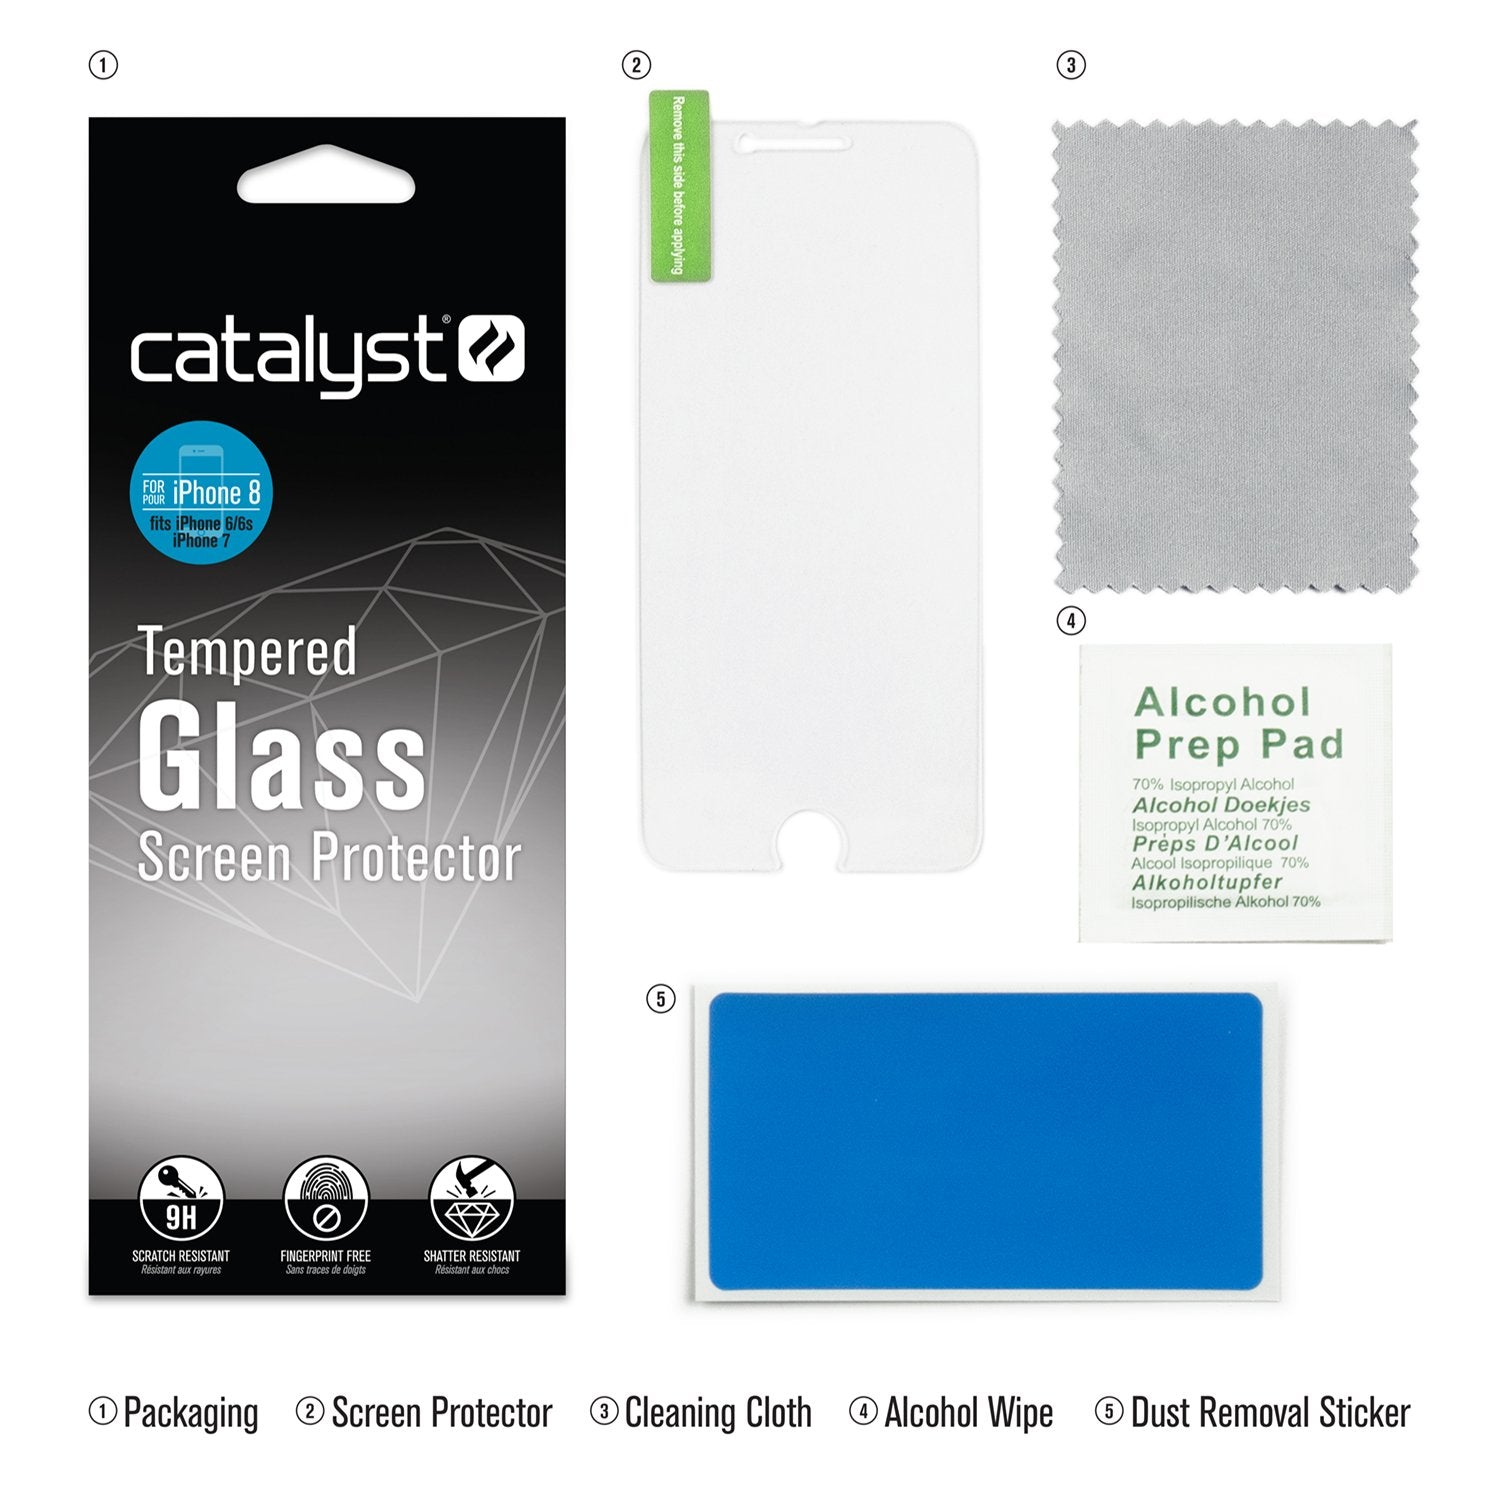 CATGLASIPHO8 | Tempered Glass Screen Protector for iPhone 8